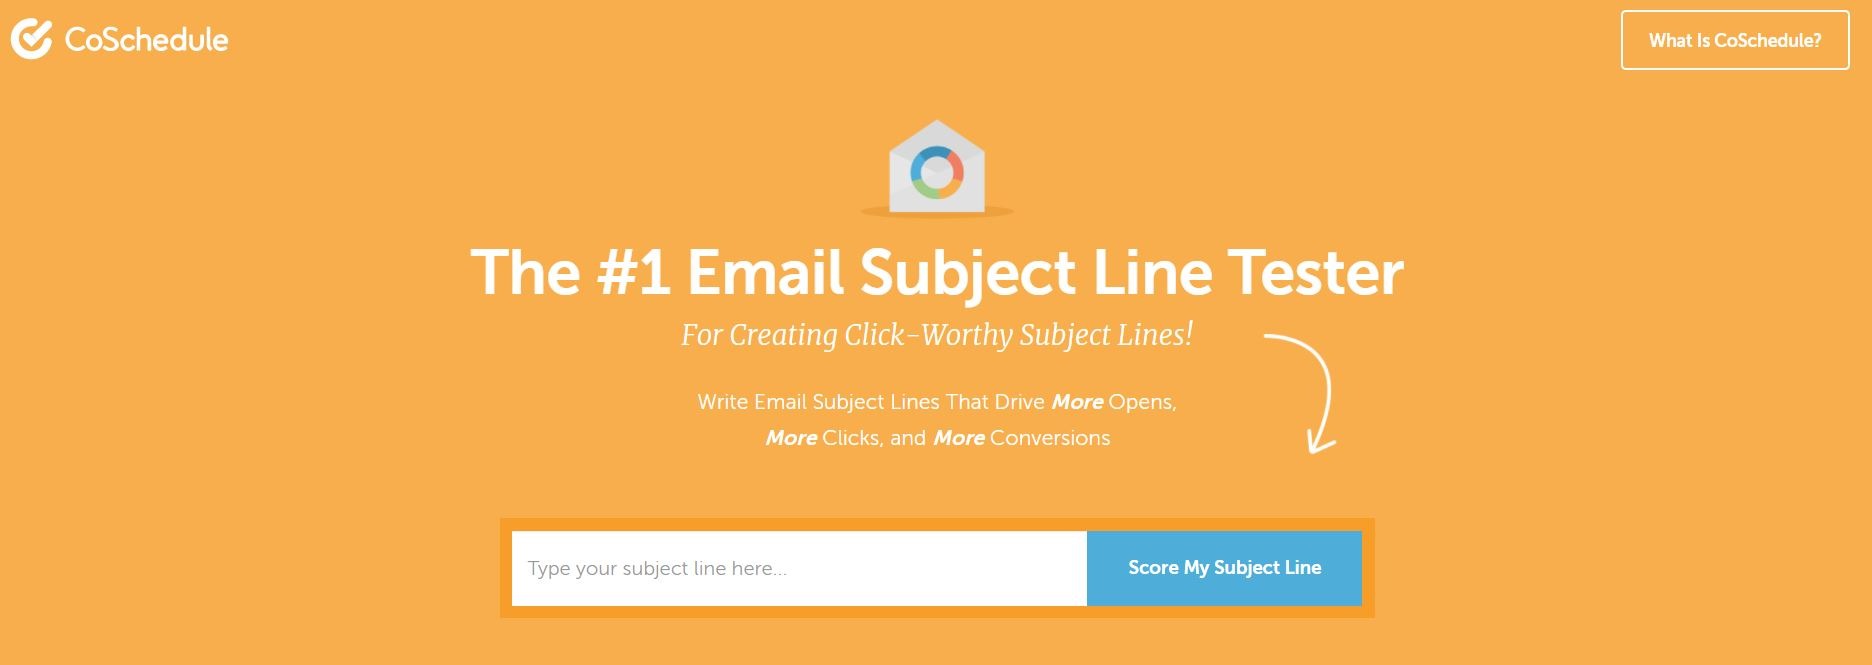 Email Subject Line Tester by CoSchedule